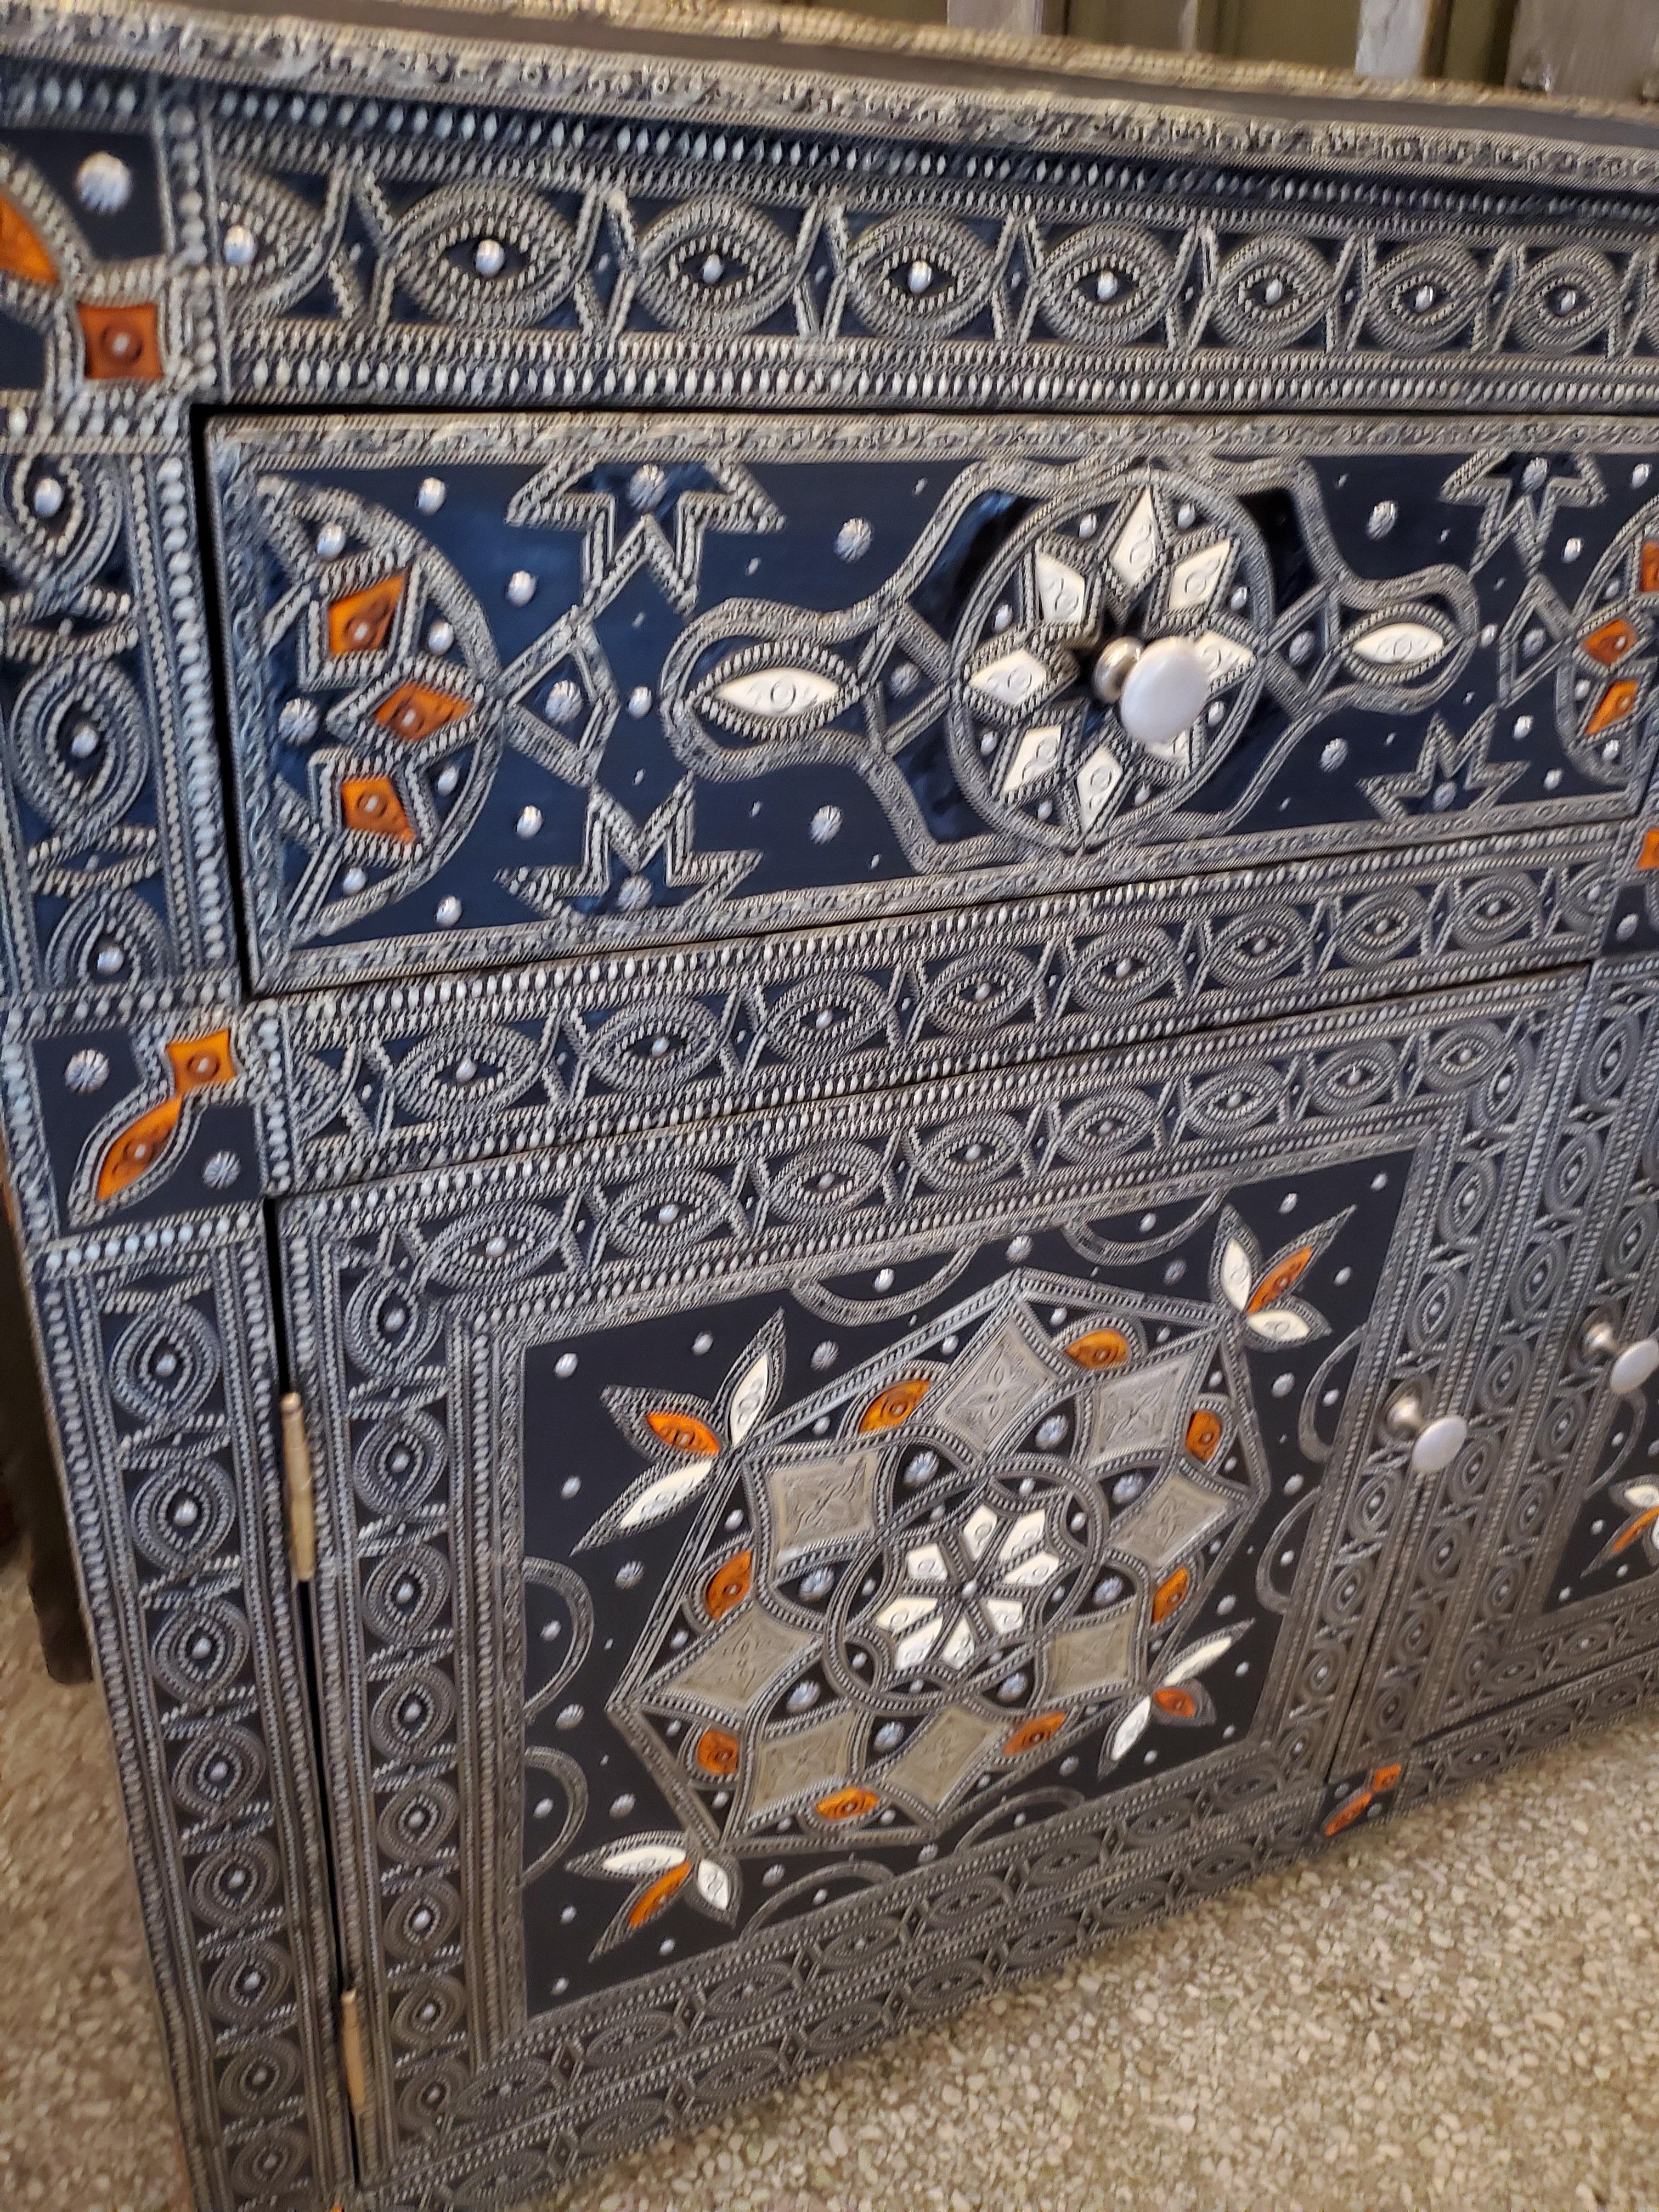 Aged all metal inlaid handmade Moroccan wooden cabinet measuring approximately 34” in height, 49” in width, and 16.5” in depth, and featuring 2 easy access doors and two easy to open drawers above. Plenty of storage. Lots of details throughout. Can